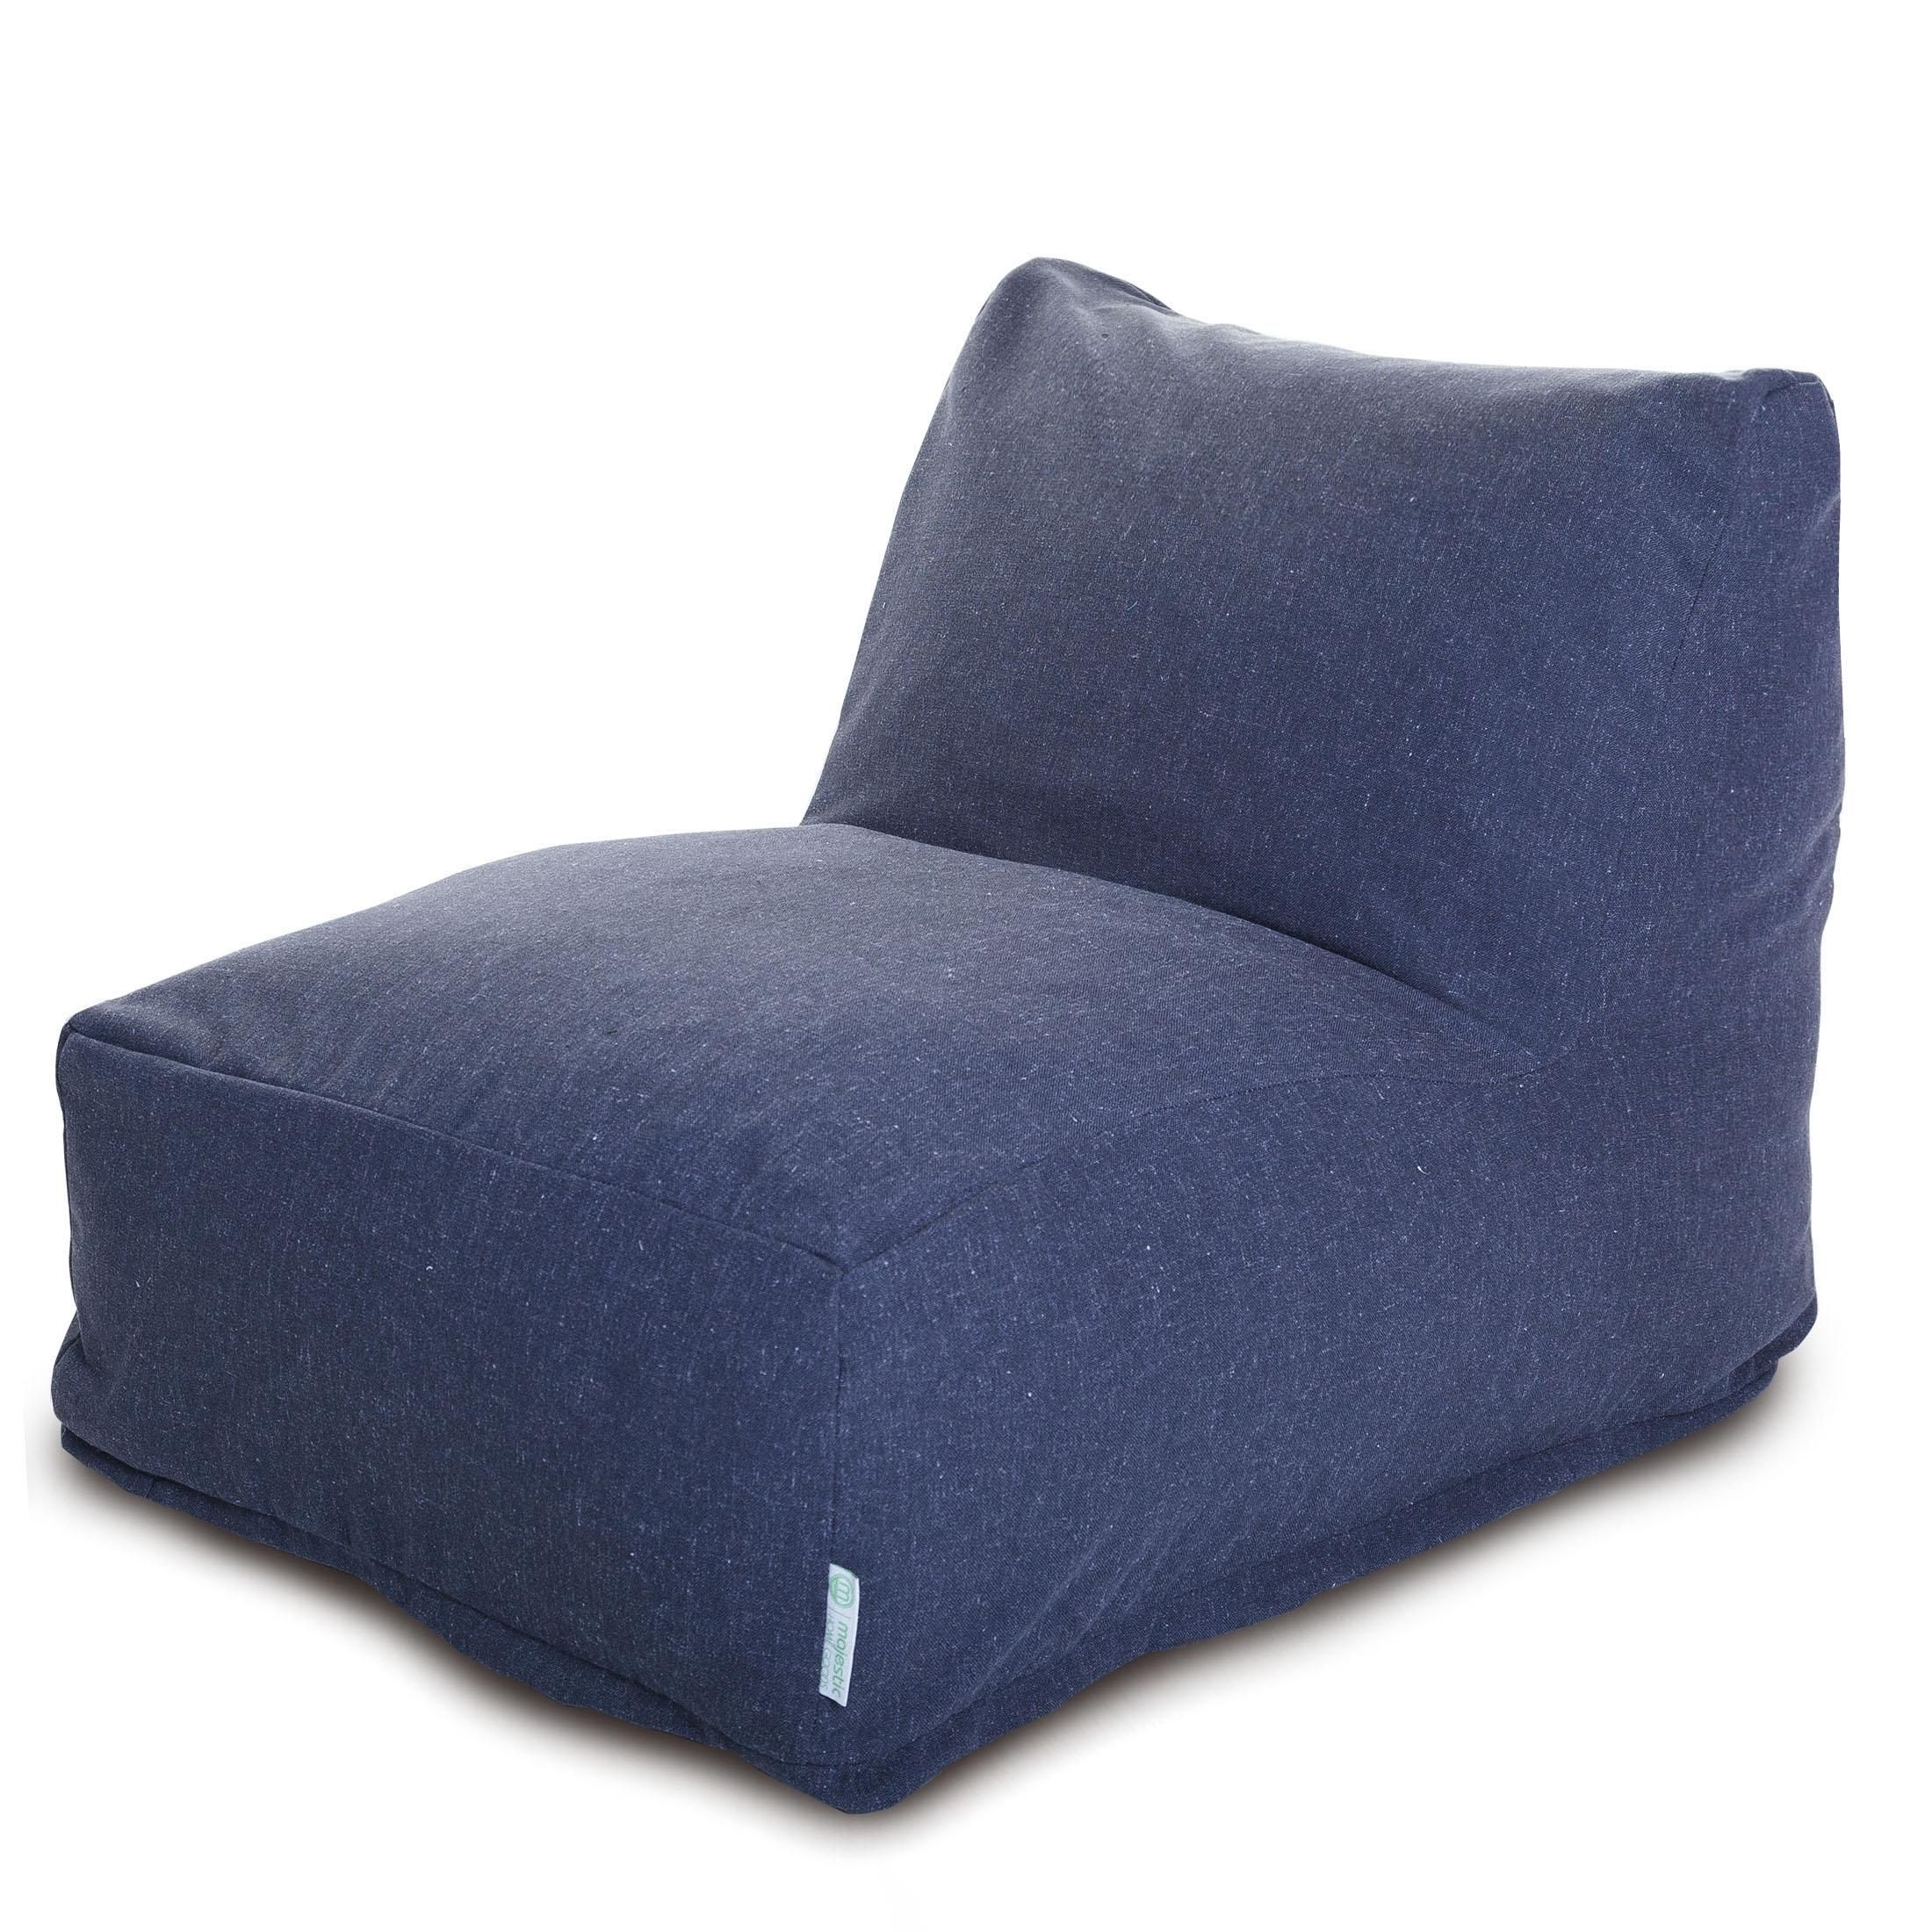 Lounge Chairs | Sofa Chairs | Patio Furniture | Majestic Home Goods With Bean Bag Sofa Chairs (View 1 of 20)